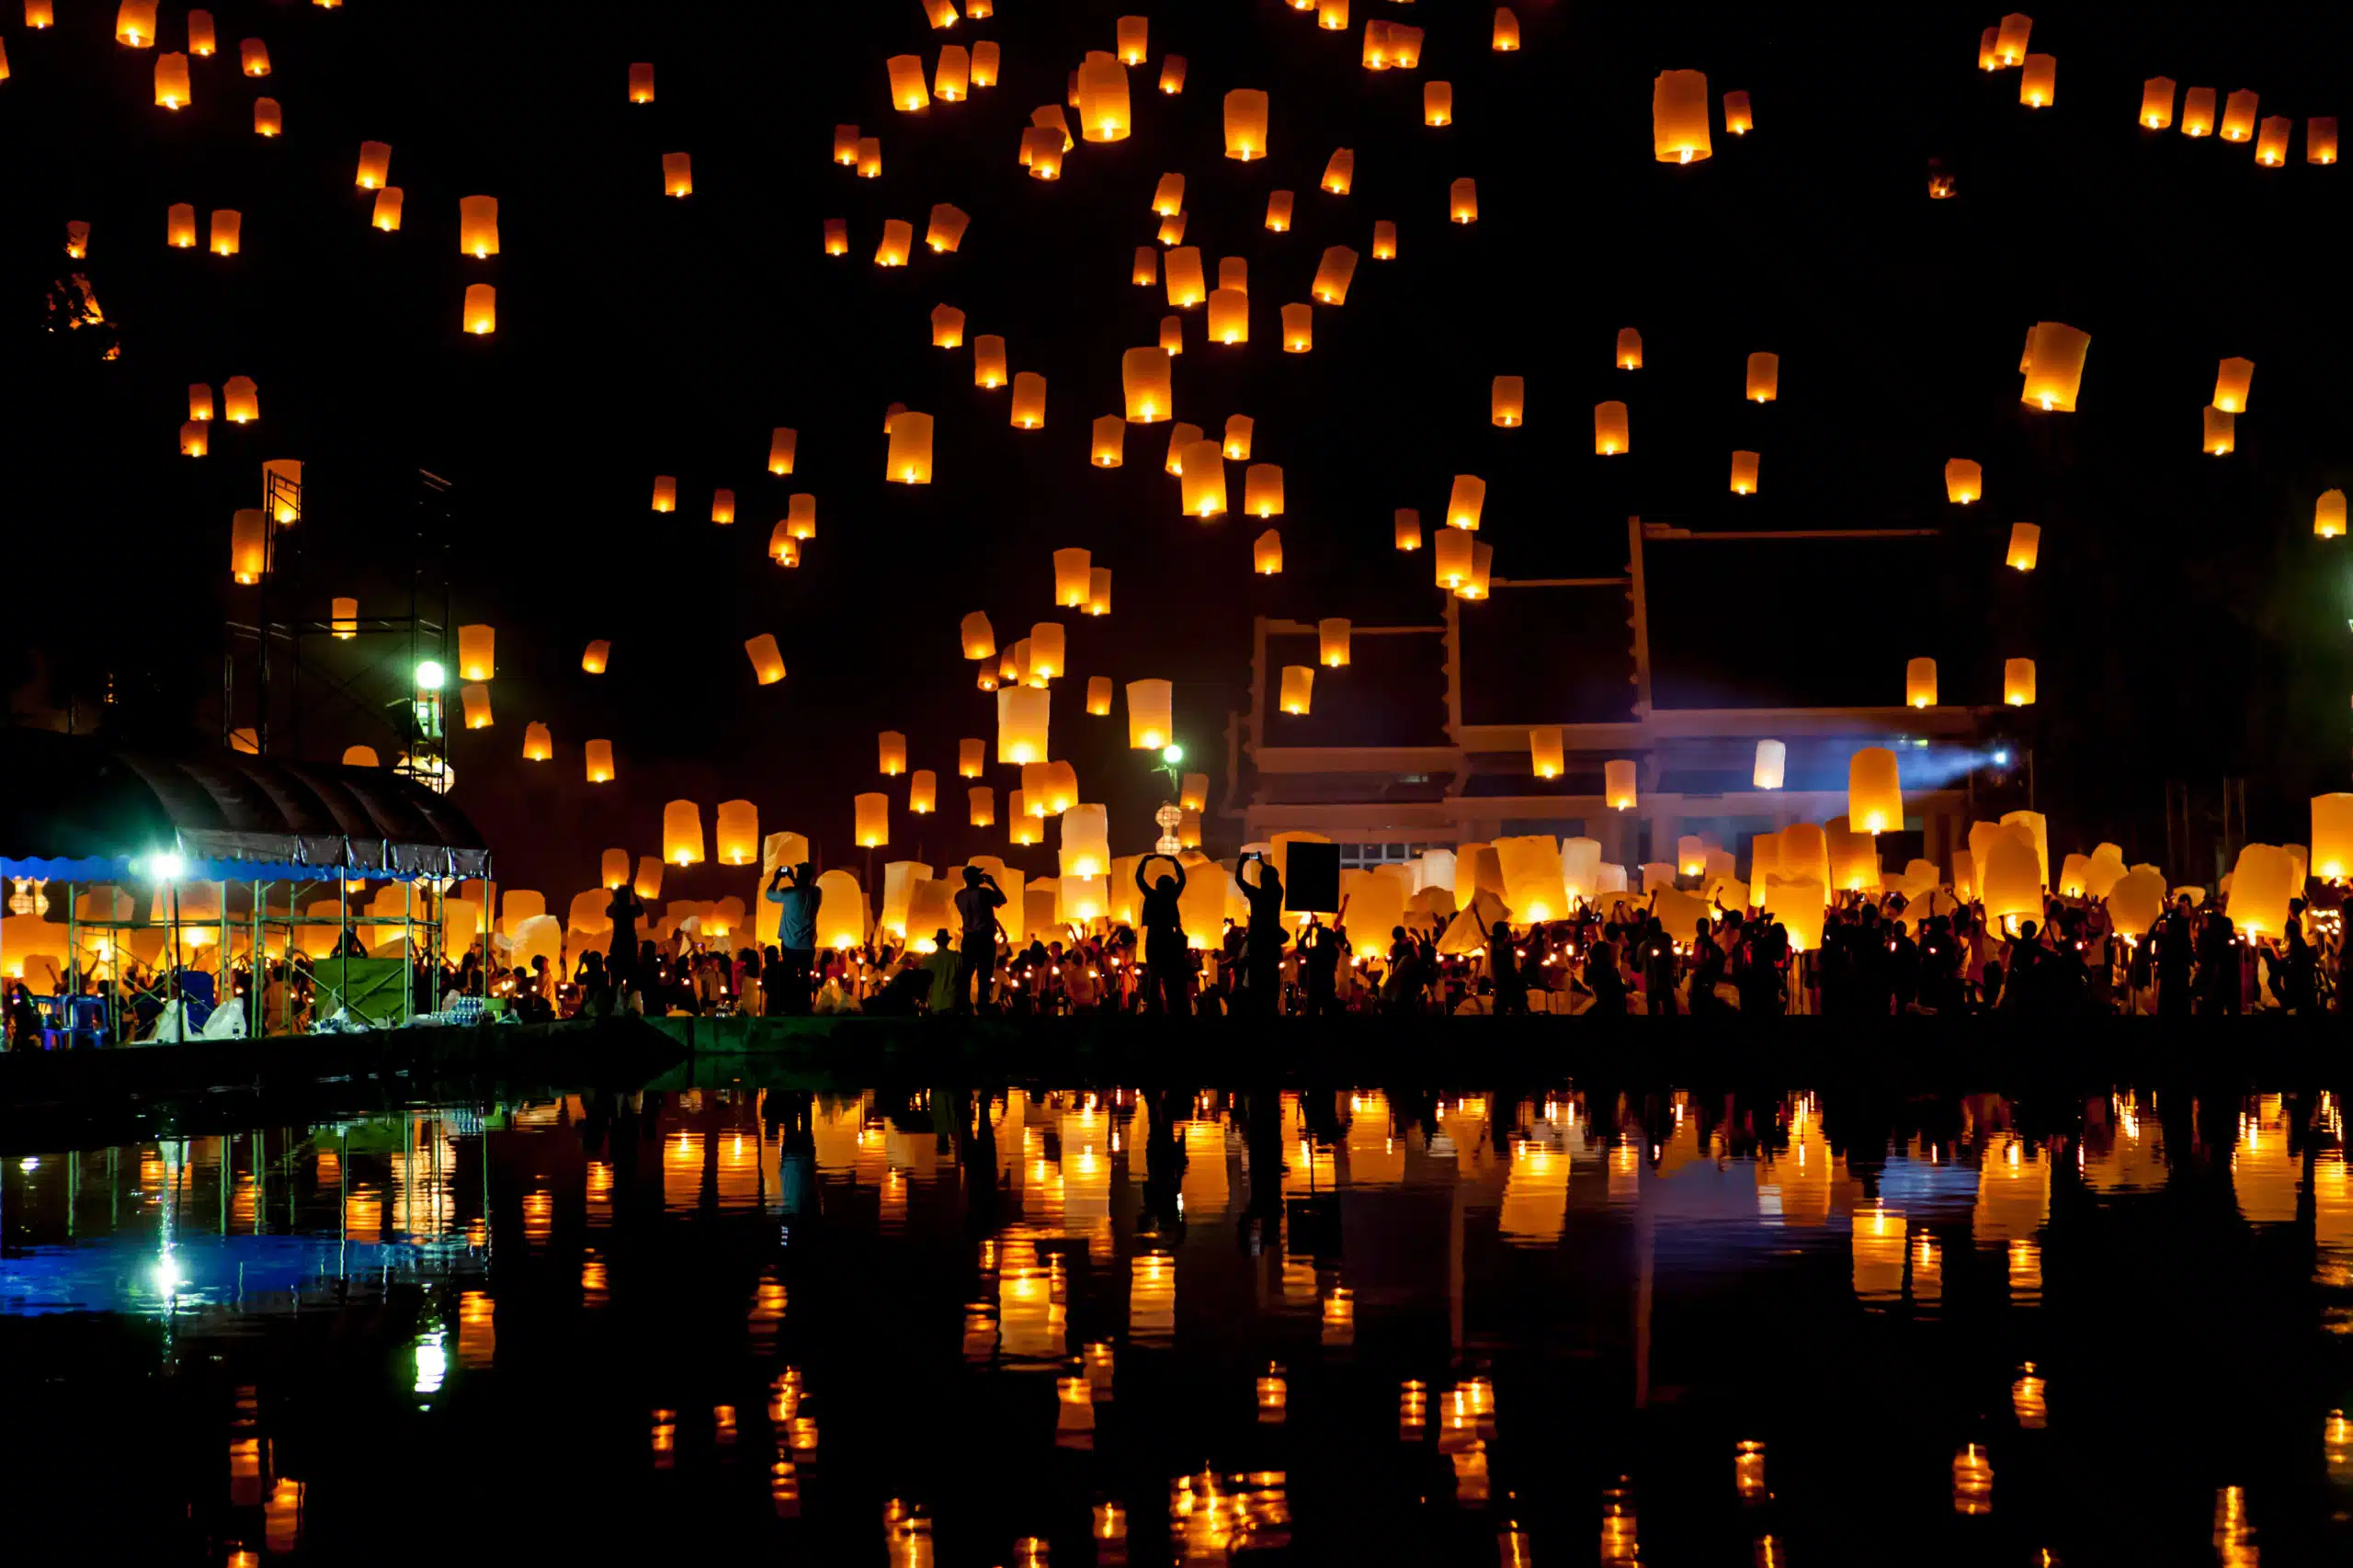 People release sky lanterns to pay homage to the triple Gem of Buddhism.